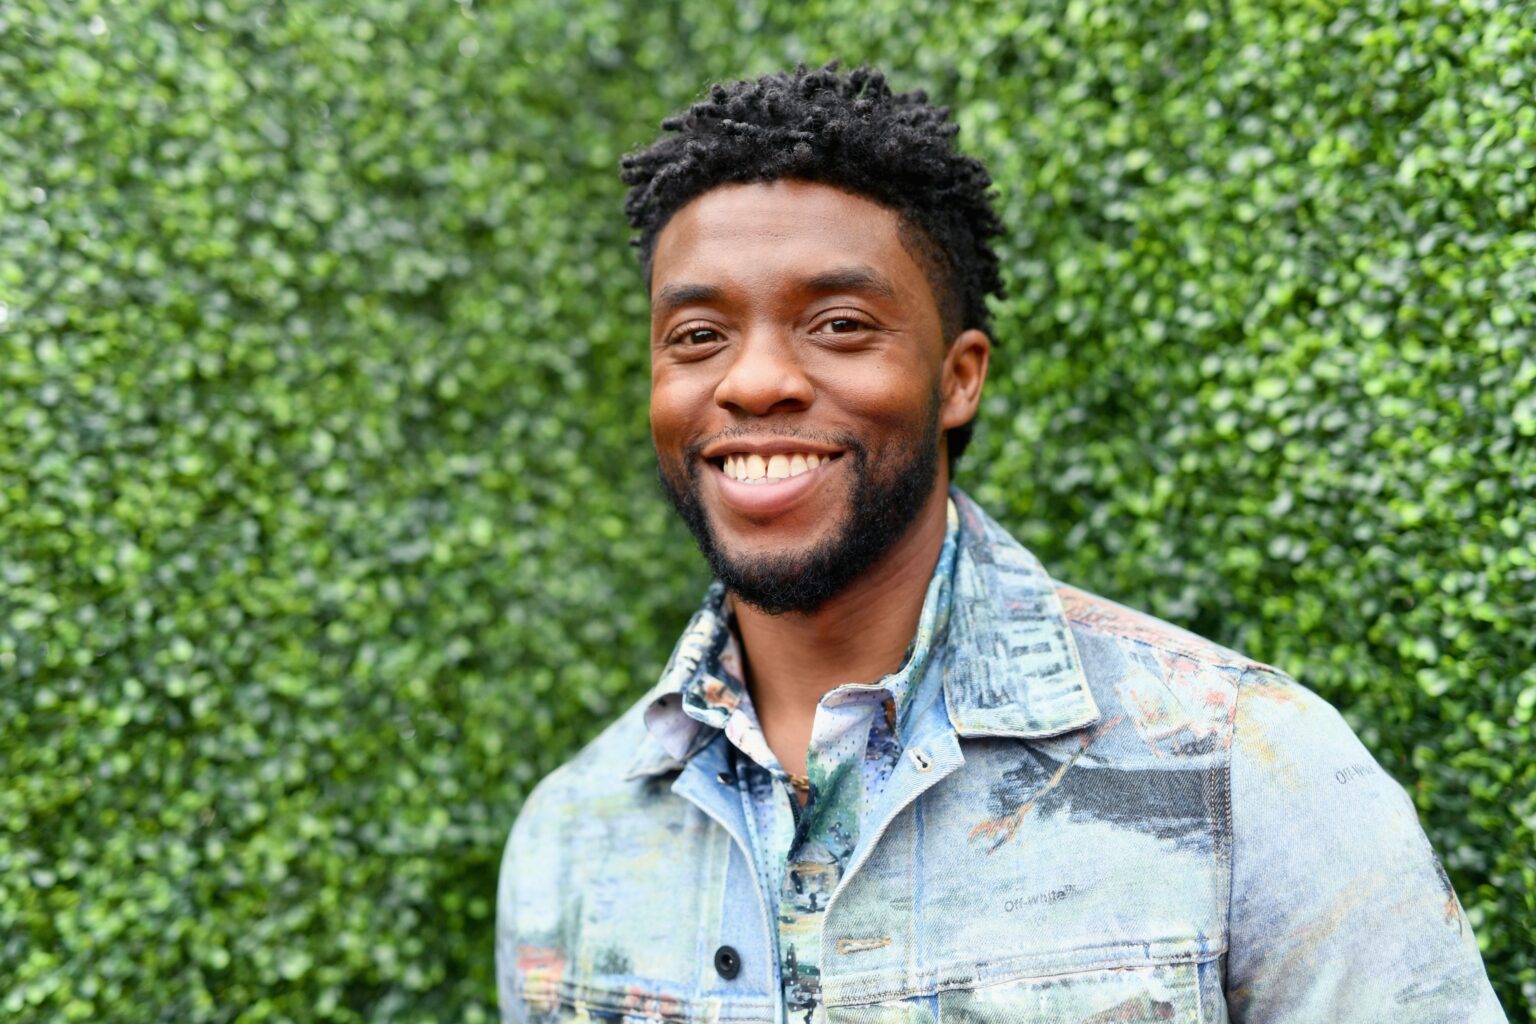 Chadwick Boseman passed away after a private battle with cancer. But in his 43 years of life, he proved he was a real live version of the Black Panther.